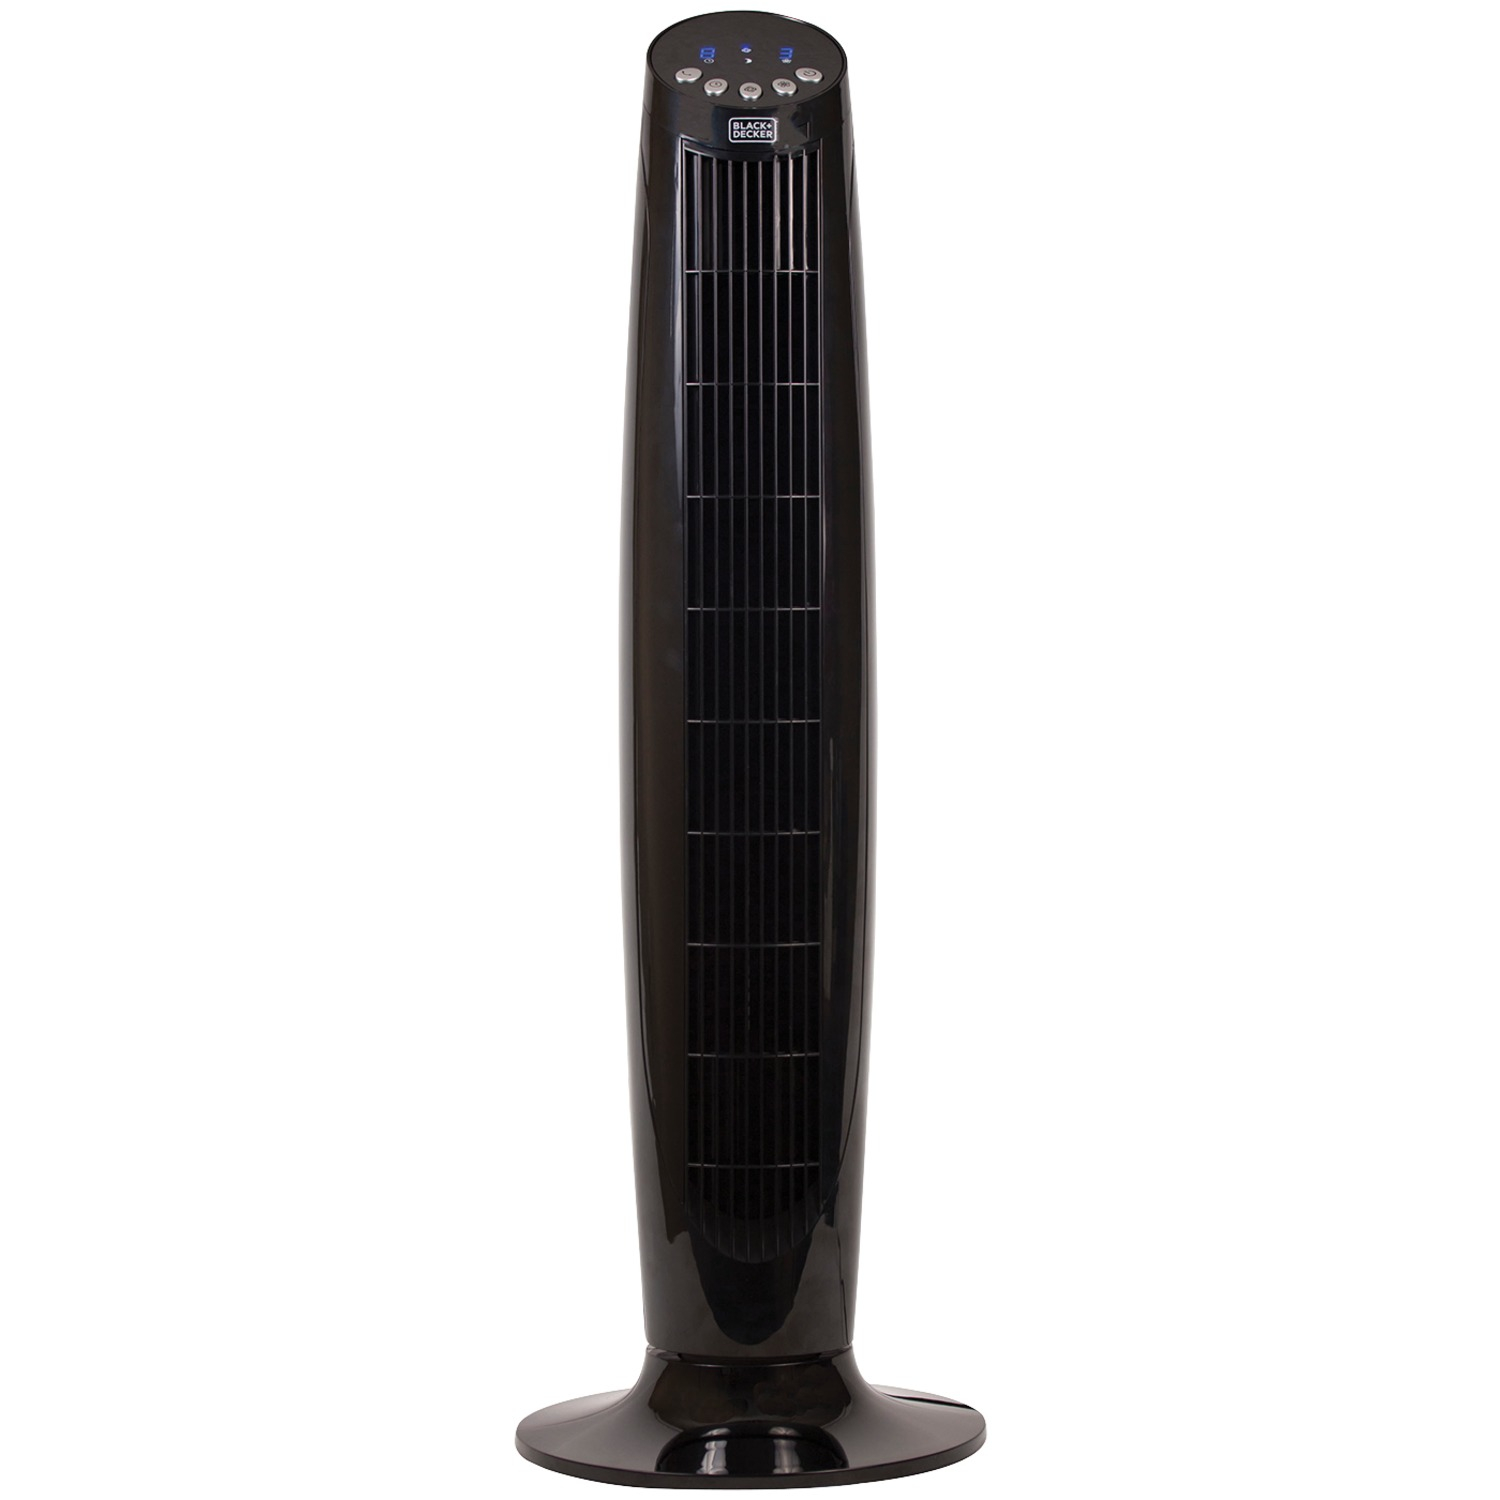 Blackdecker Bftr36b 36 Quiet Digital Tower Fan With Remote Control 36 Fan Black Walmart intended for proportions 1500 X 1500